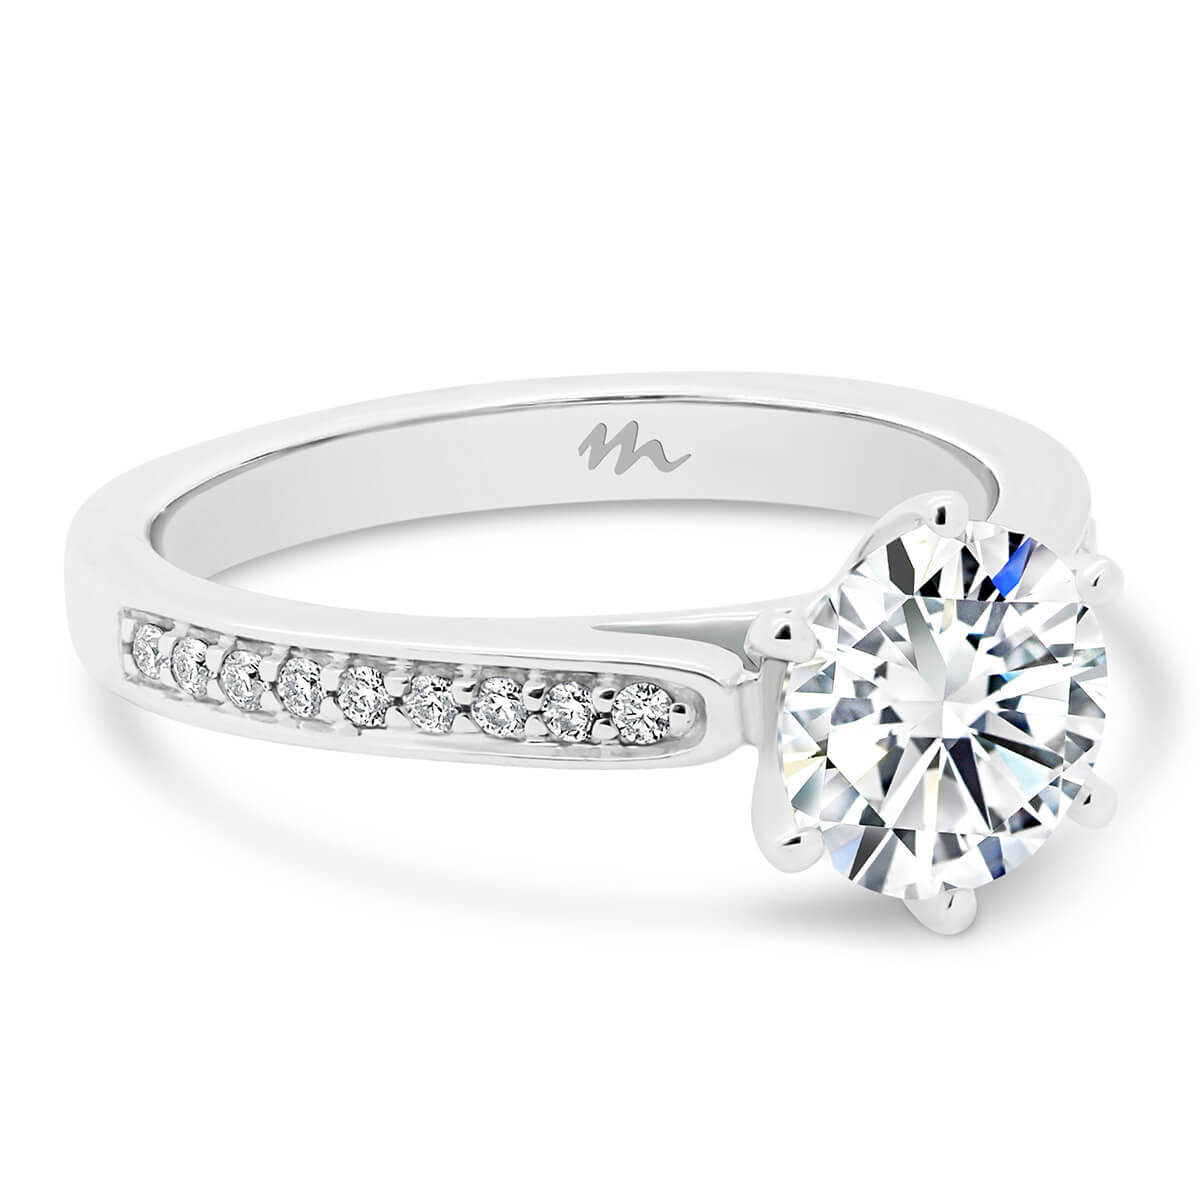 Milla Moissanite engagement ring with a pave band